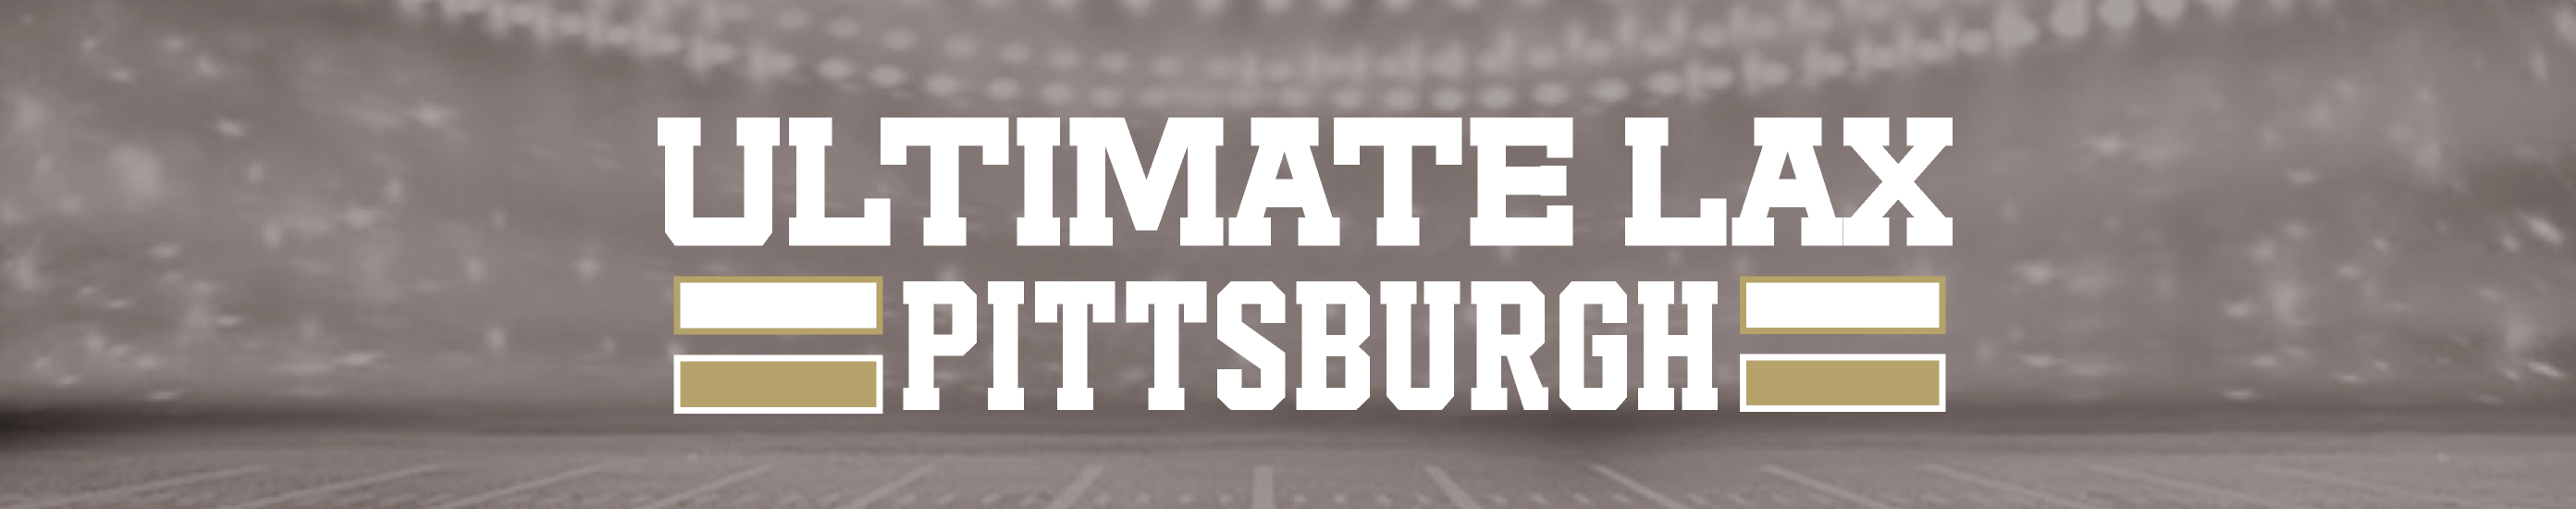 Ultimate Lax Pittsburgh